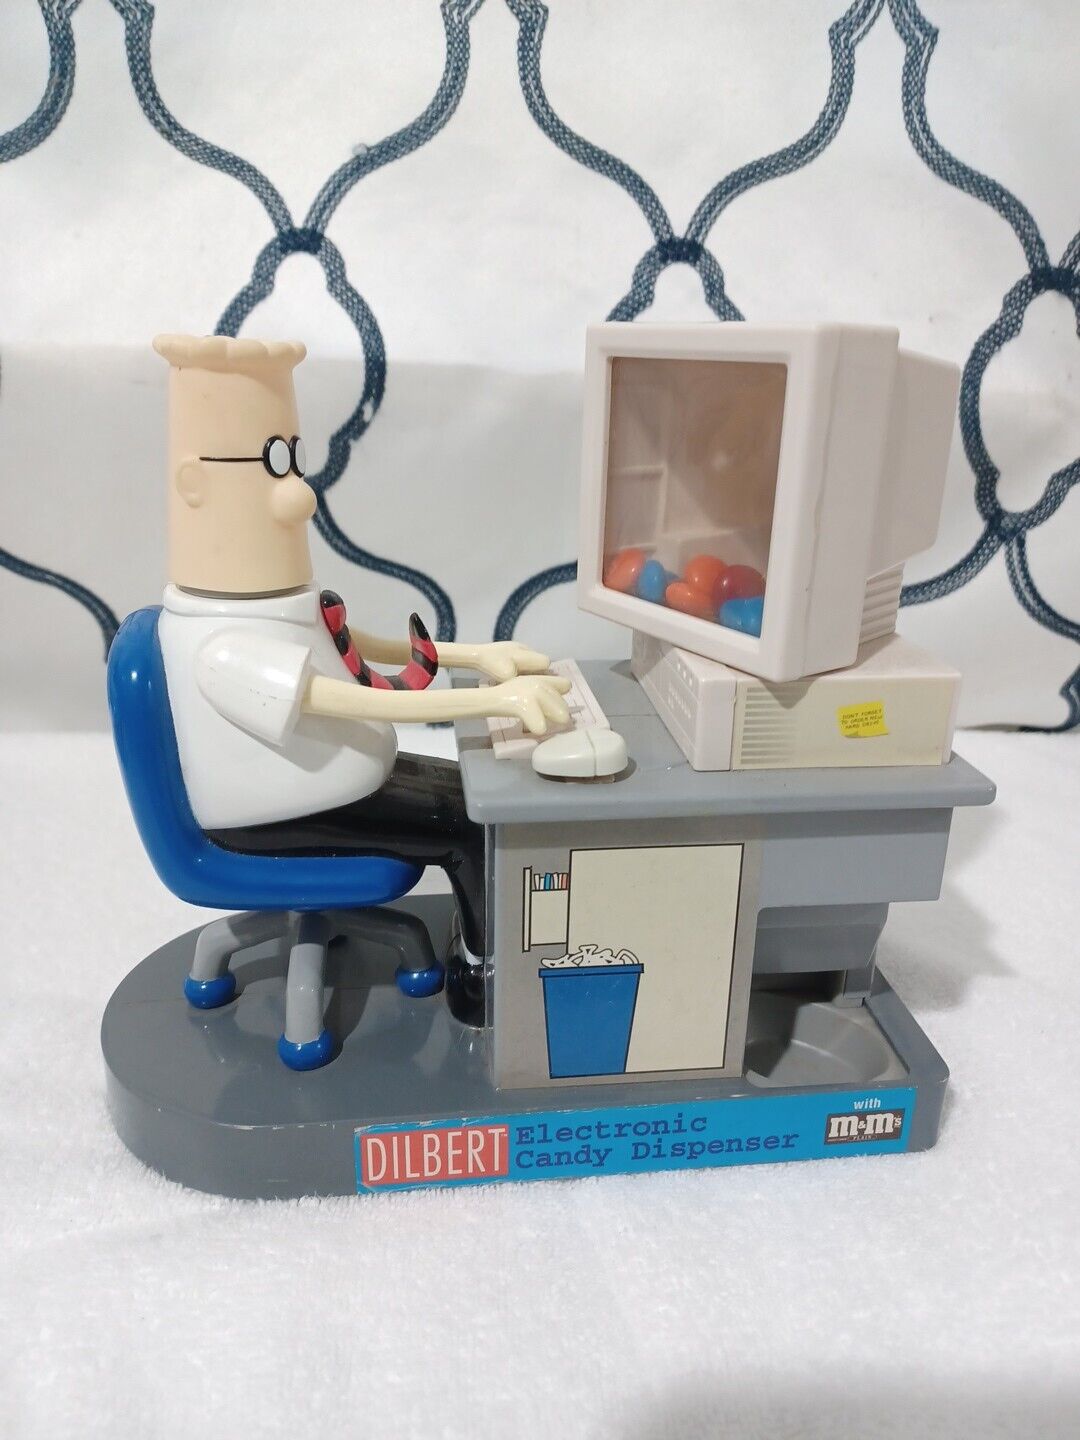 Vintage Dilbert Electronic Candy Dispenser - Excellent Condition